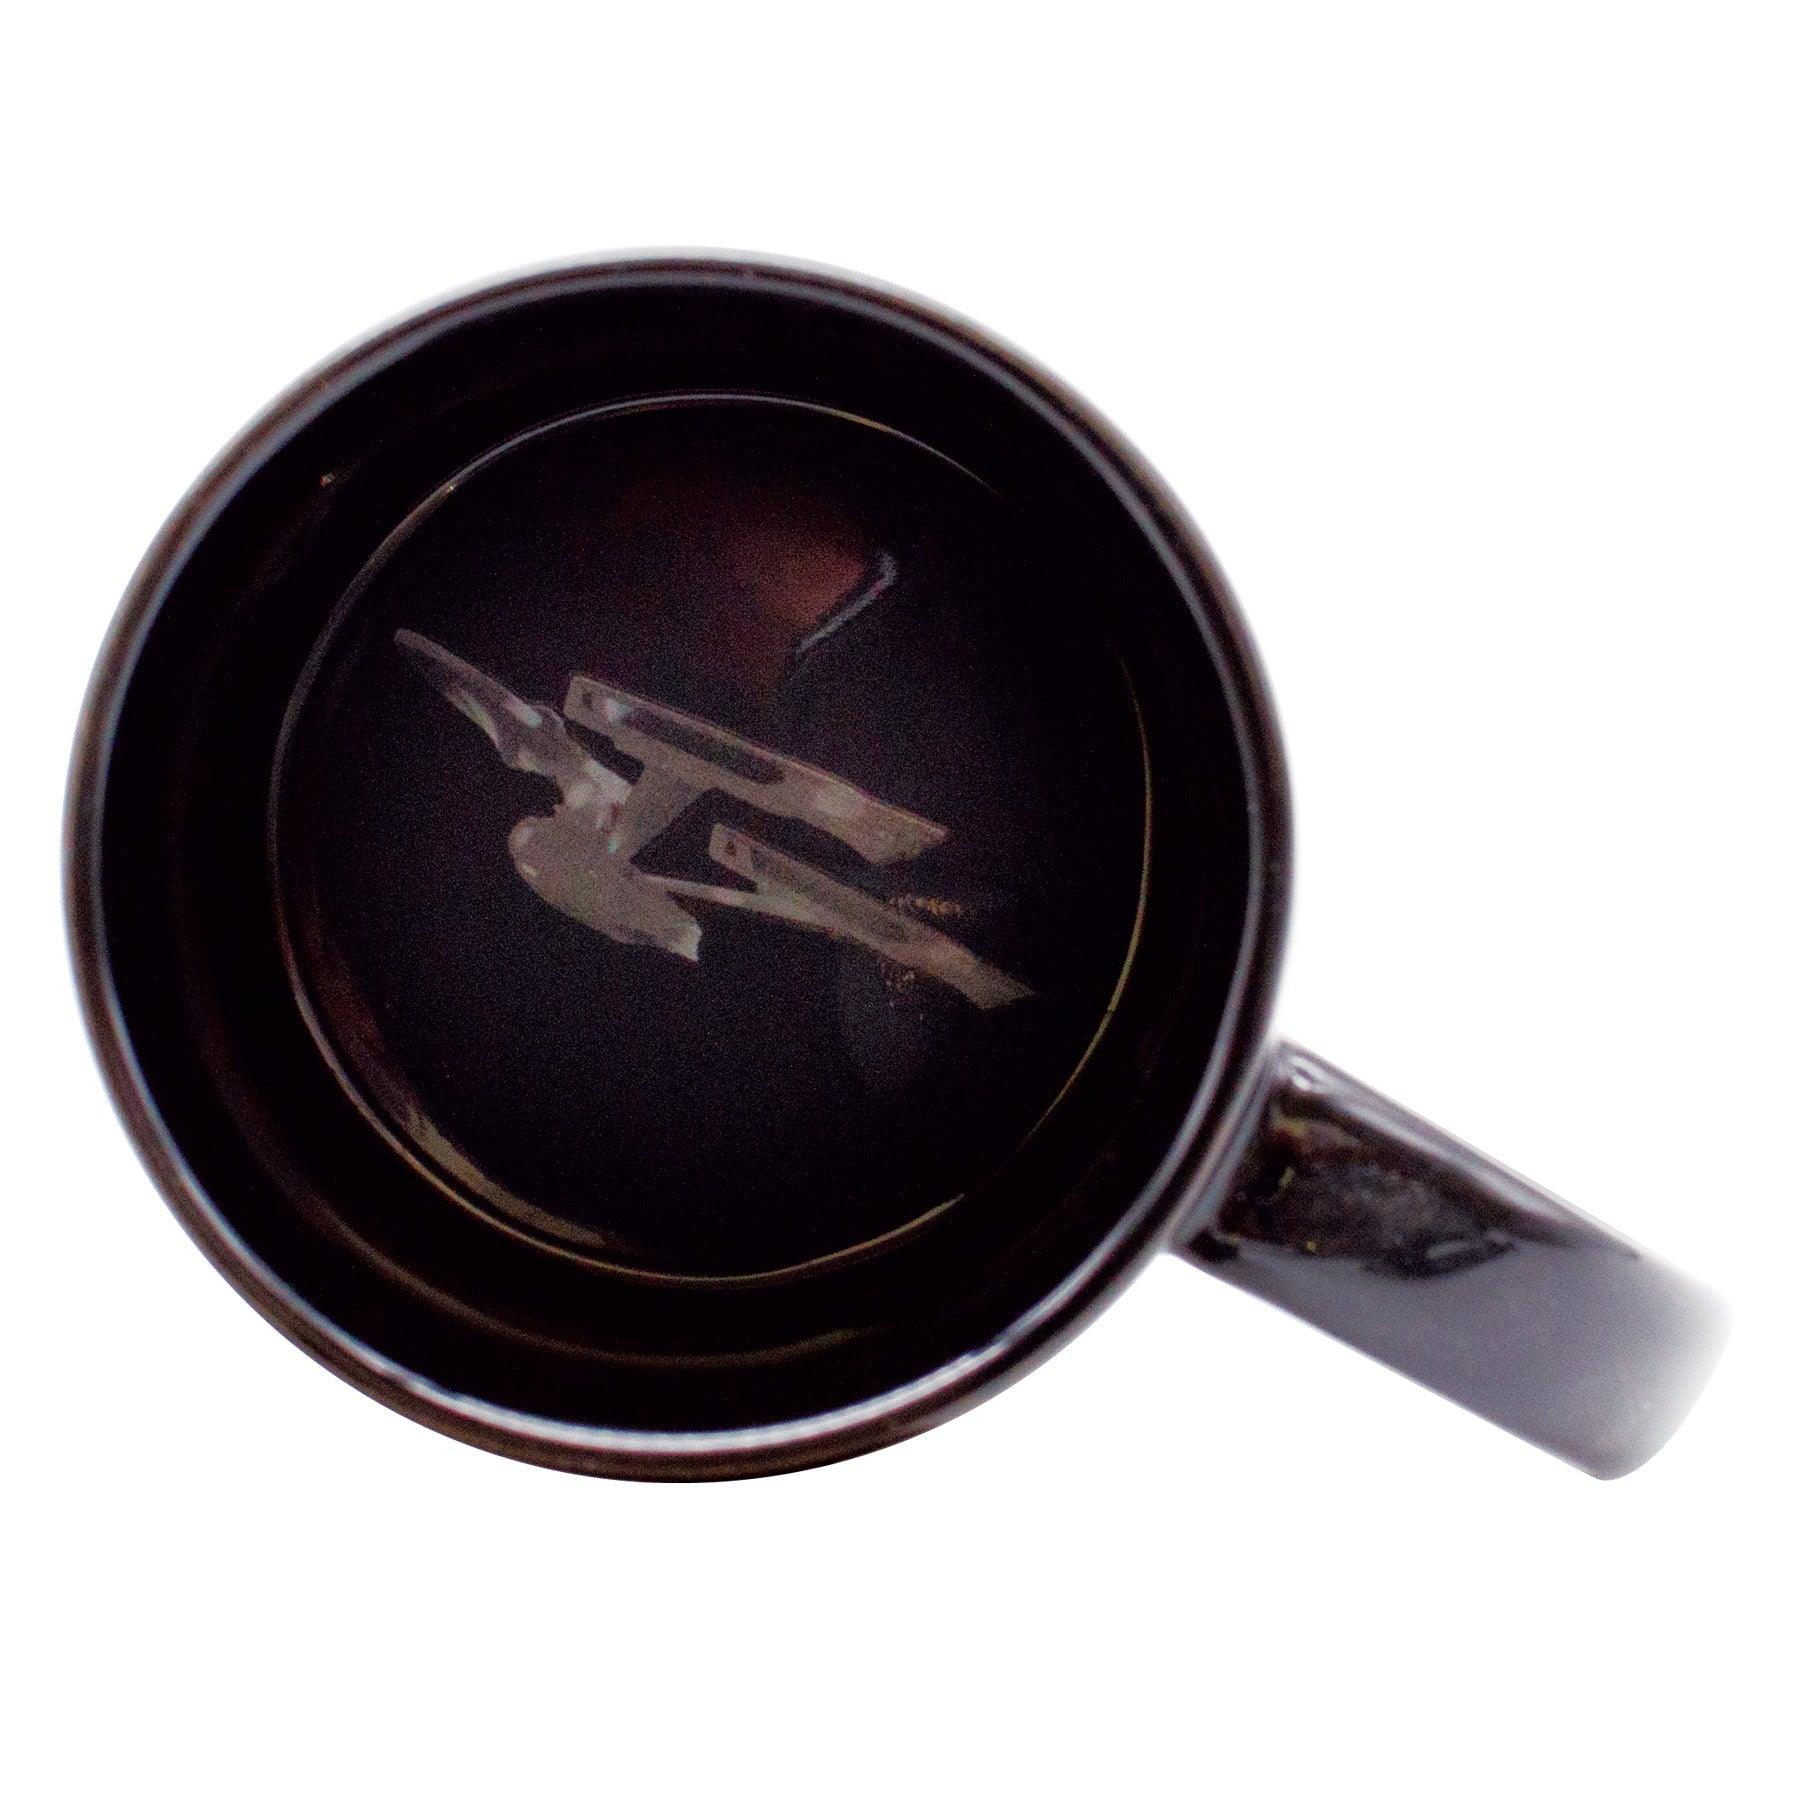 Starships of Star Trek Mug  Smart and Funny Gifts by UPG – The Unemployed  Philosophers Guild